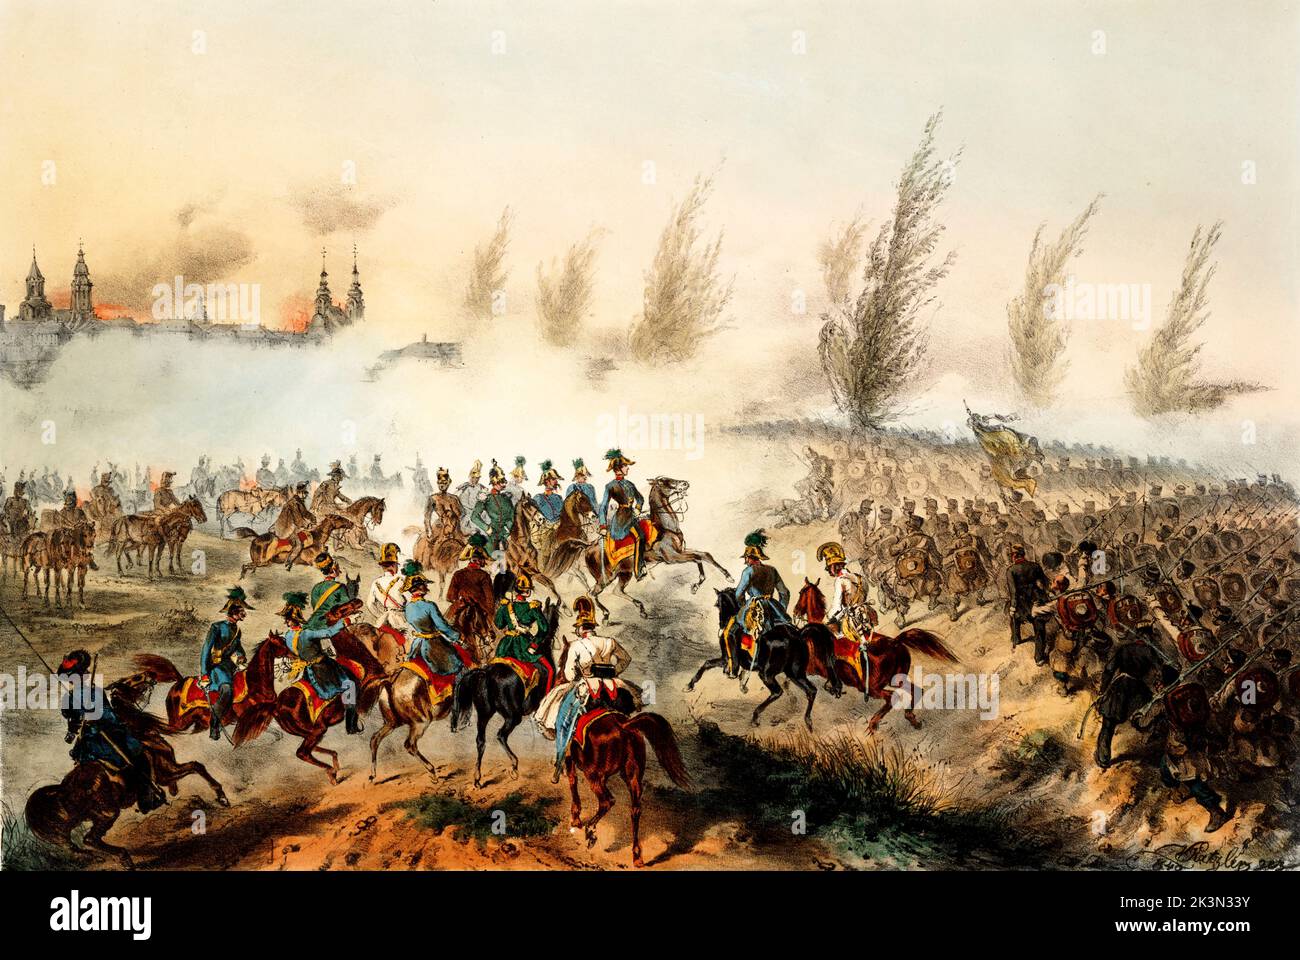 The Battle of Győr on 28 June 1849. Franz Joseph enters Győr leading the Austrian troops. Vinzenz Katzler  The Battle of Győr took place during the Summer Campaign of the Hungarian War of Independence. It was fought 28 June 1849 in the Hungarian city of Győr. The Hungarian Revolutionary Army was led by General Ernő Poeltenberg and General Artúr Görgei. The Austrian Empire was led by Julius Jacob von Haynau, with assistance from a Russian division led by Feodor Sergeyevich Panyutyin. Stock Photo